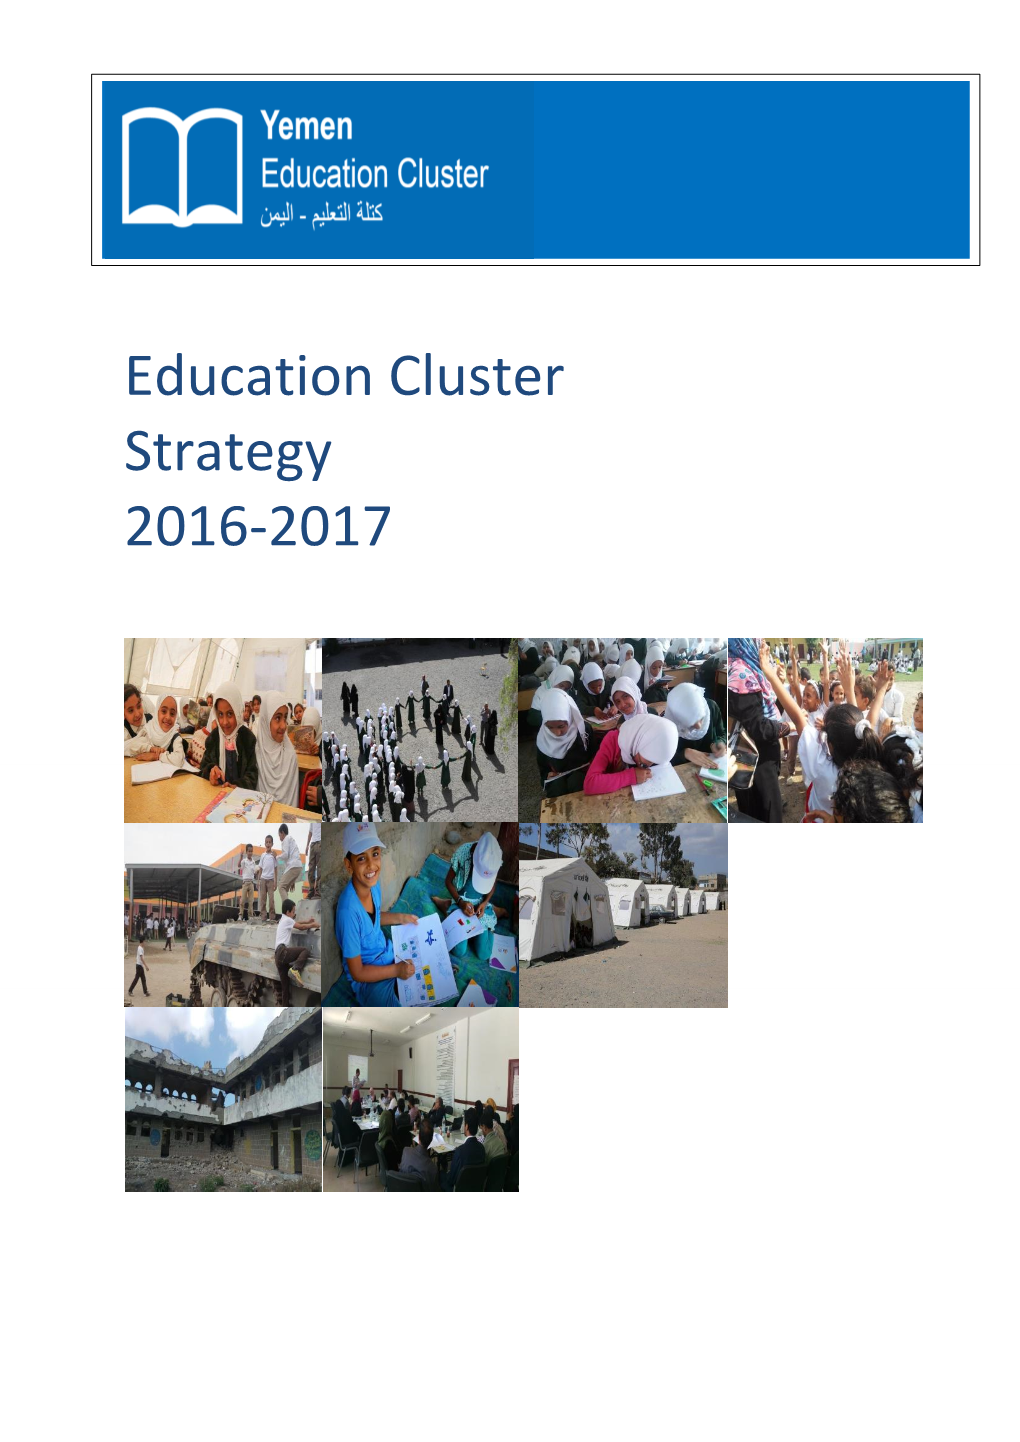 Education Cluster Strategy 2016-2017